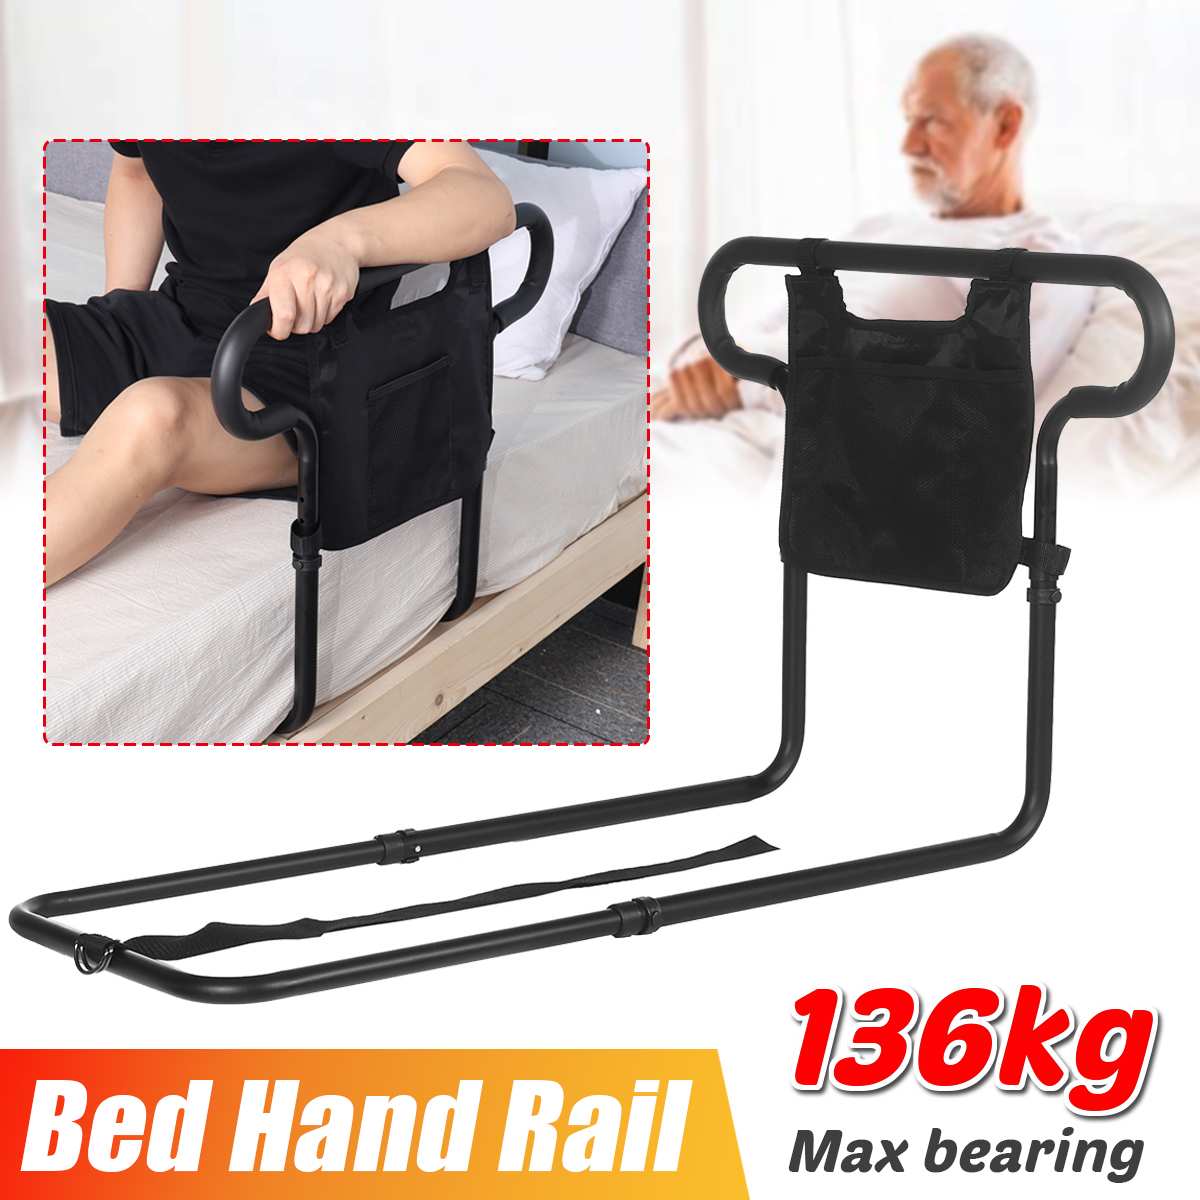 Get Up Handle Secure Bed Rail Bedroom Safety Fall Prevention Aid Handrail for Assisting Elderly and Pregnant Tool